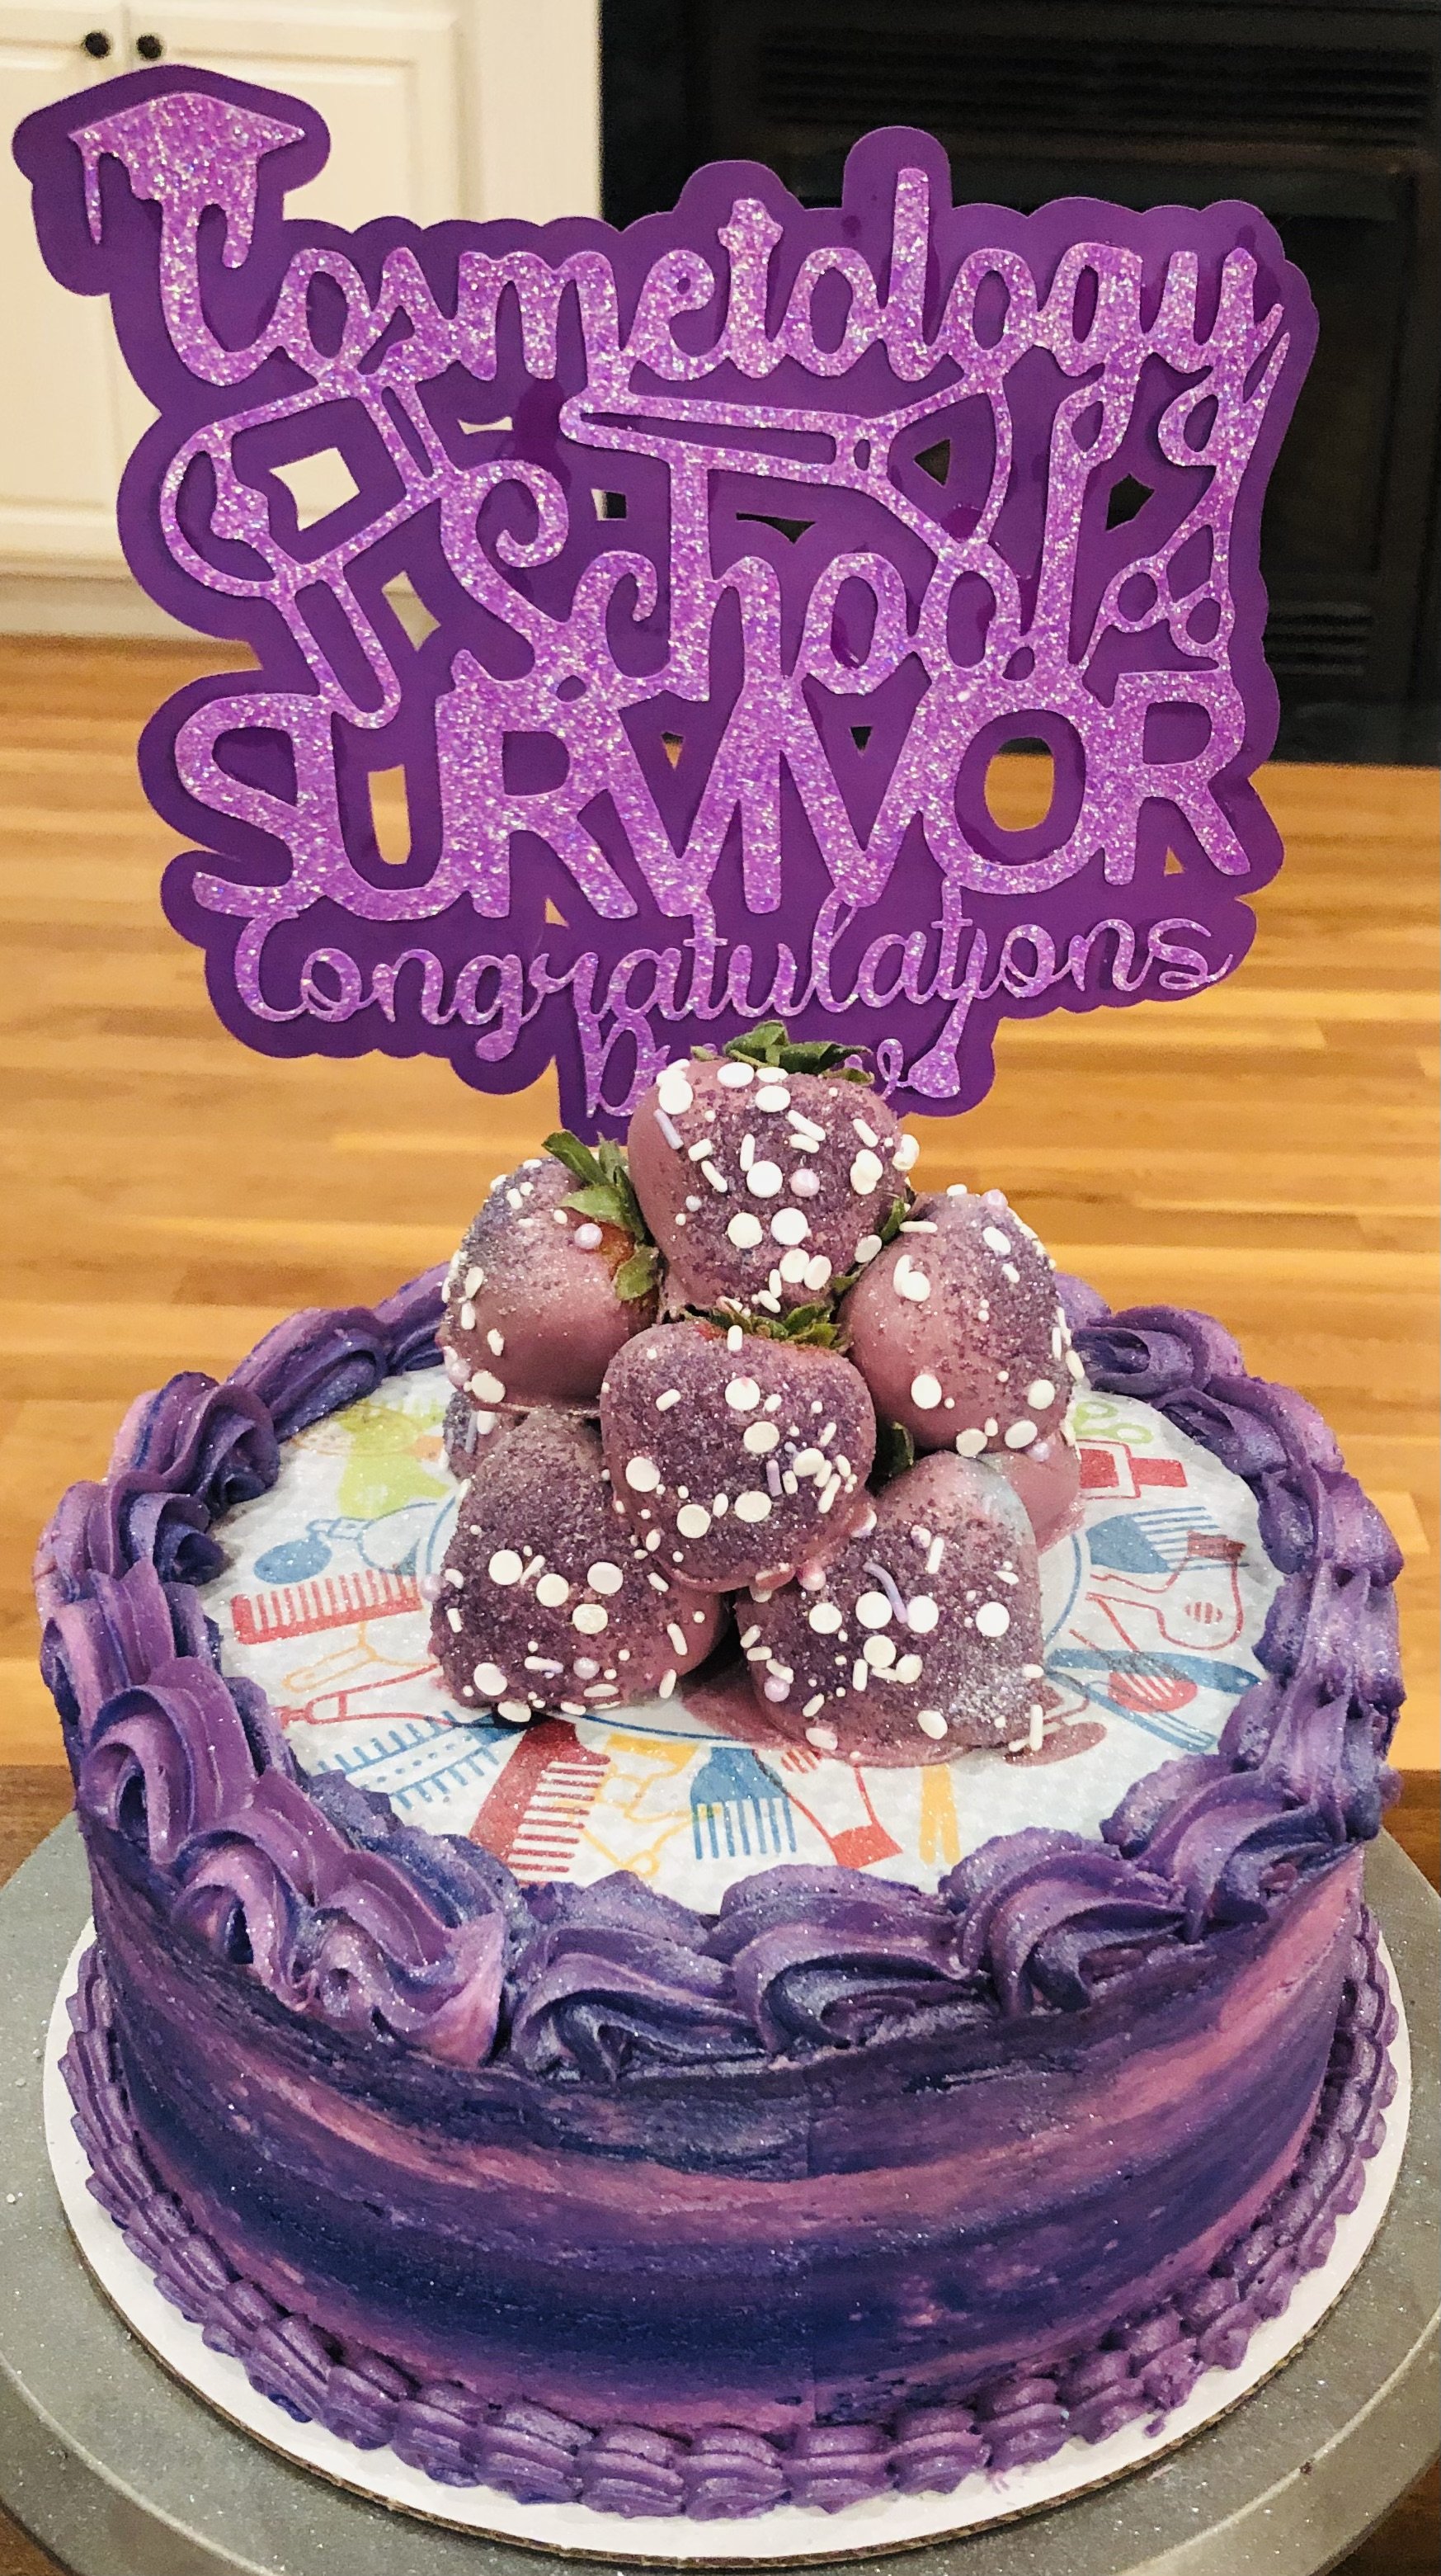 2 Layer Chocolate Cosmetology Graduation Cake with Buttercream Frosting, Edible Image, and Chocolate Dipped Strawberries